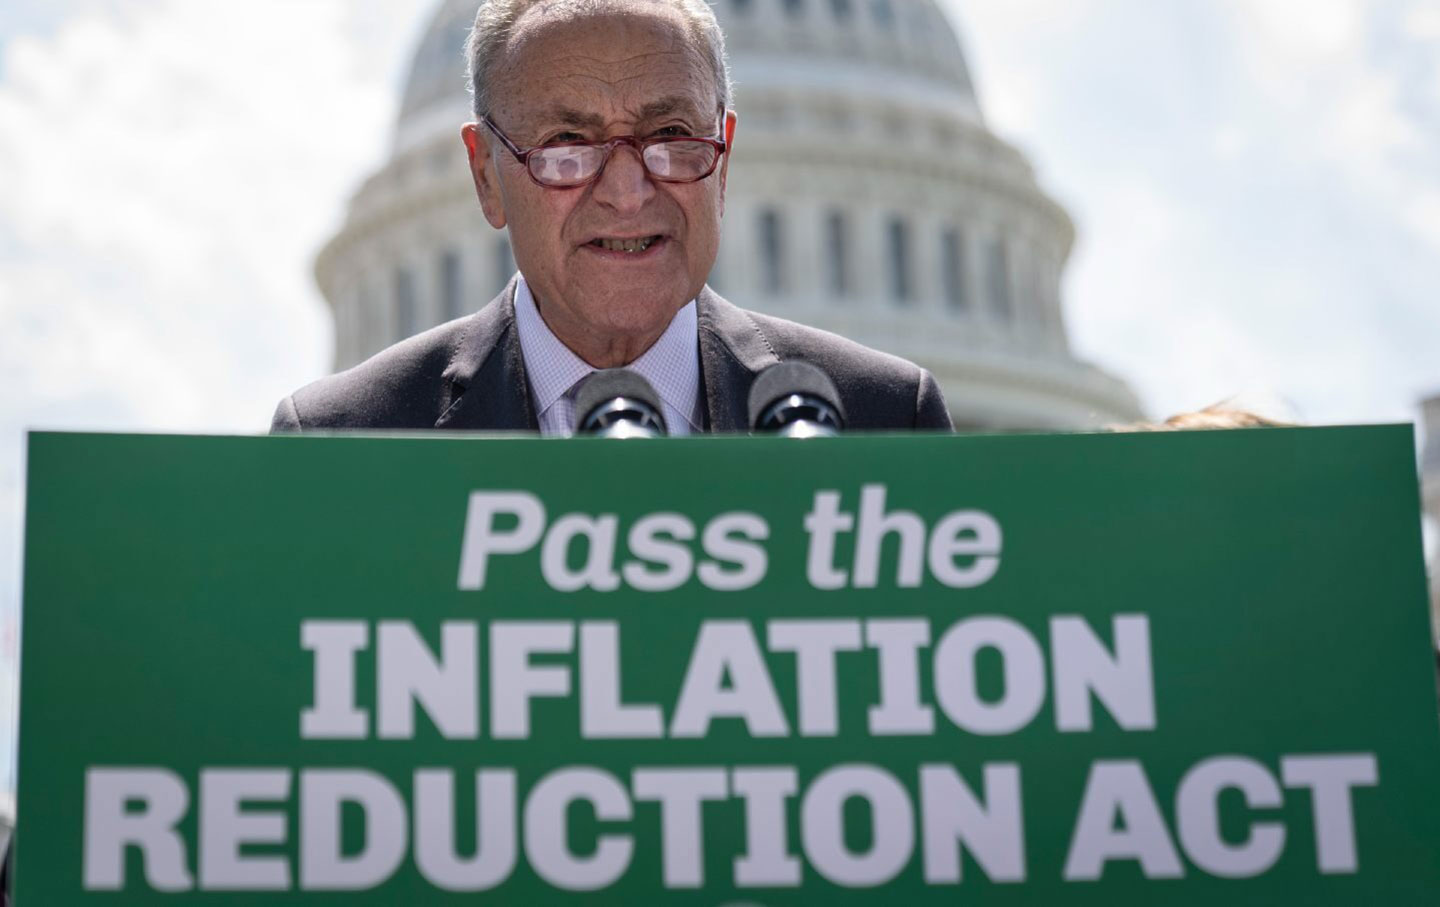 Senator Chuck Schumer speaks outside the U.S. Capitol about the Inflation Reduction Act. He stands in front of the Capitol building and in front of a green sign that reads 